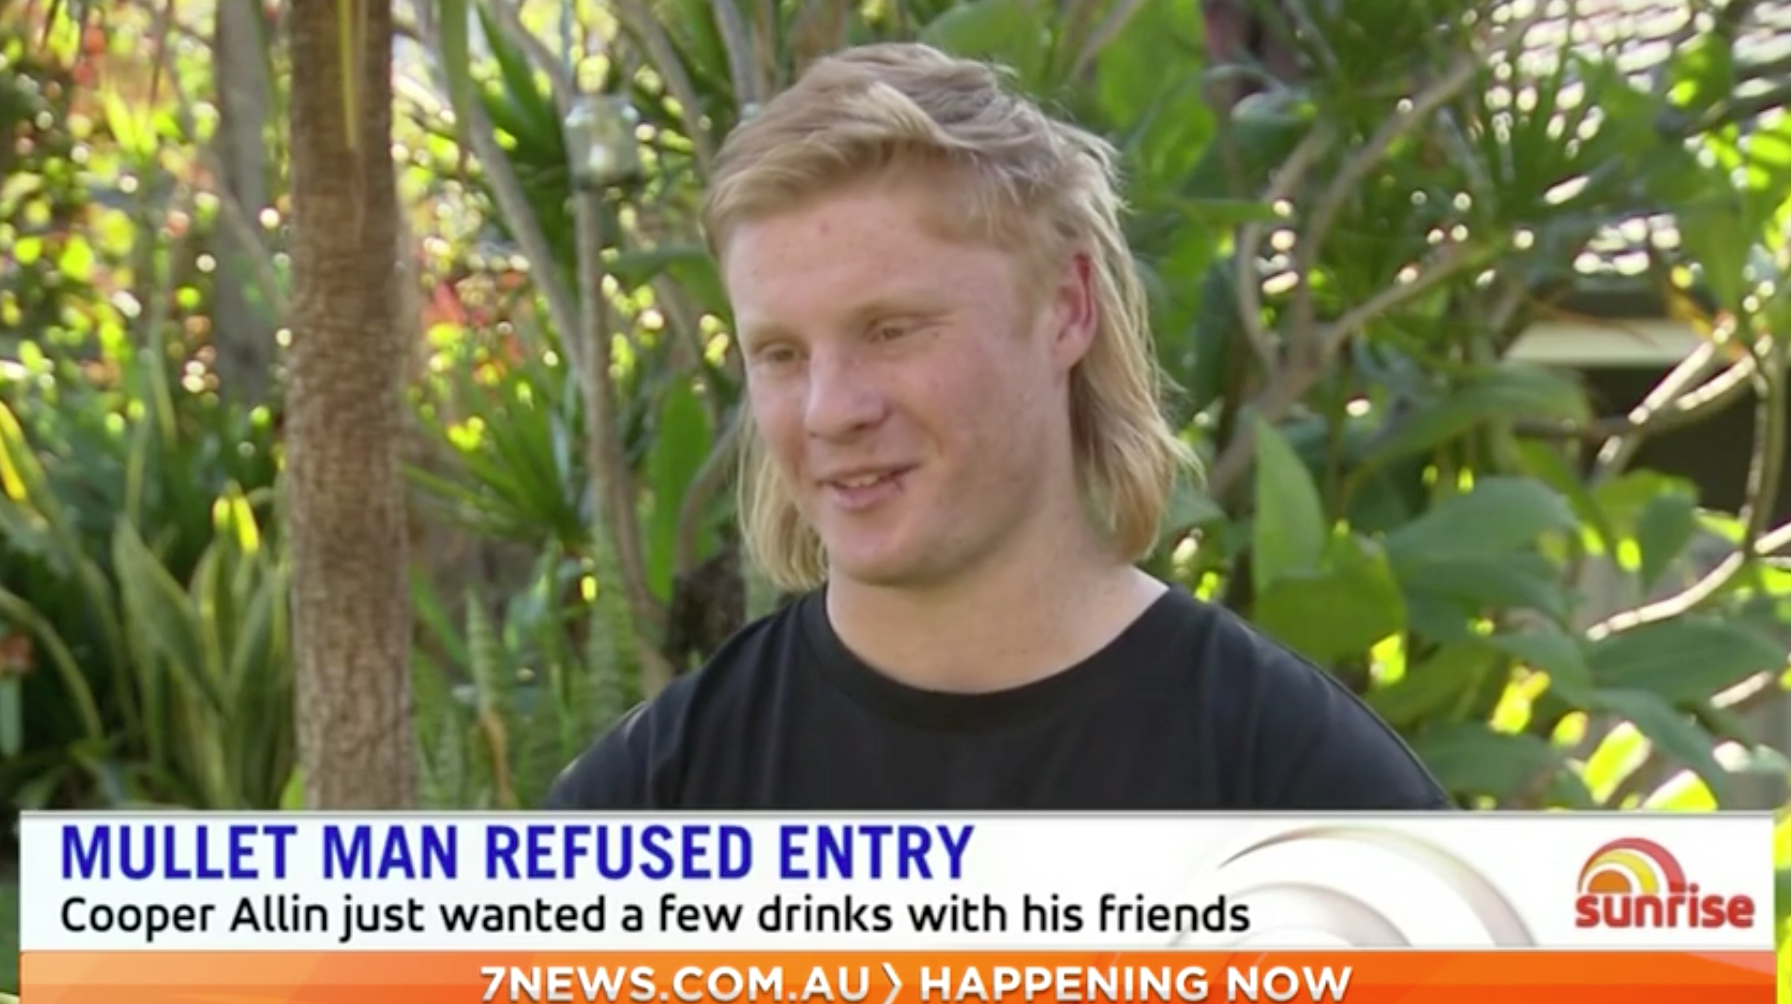 We Shit You Not, The WA Premier Has Made A Statement About This Mullet-Related Fiasco